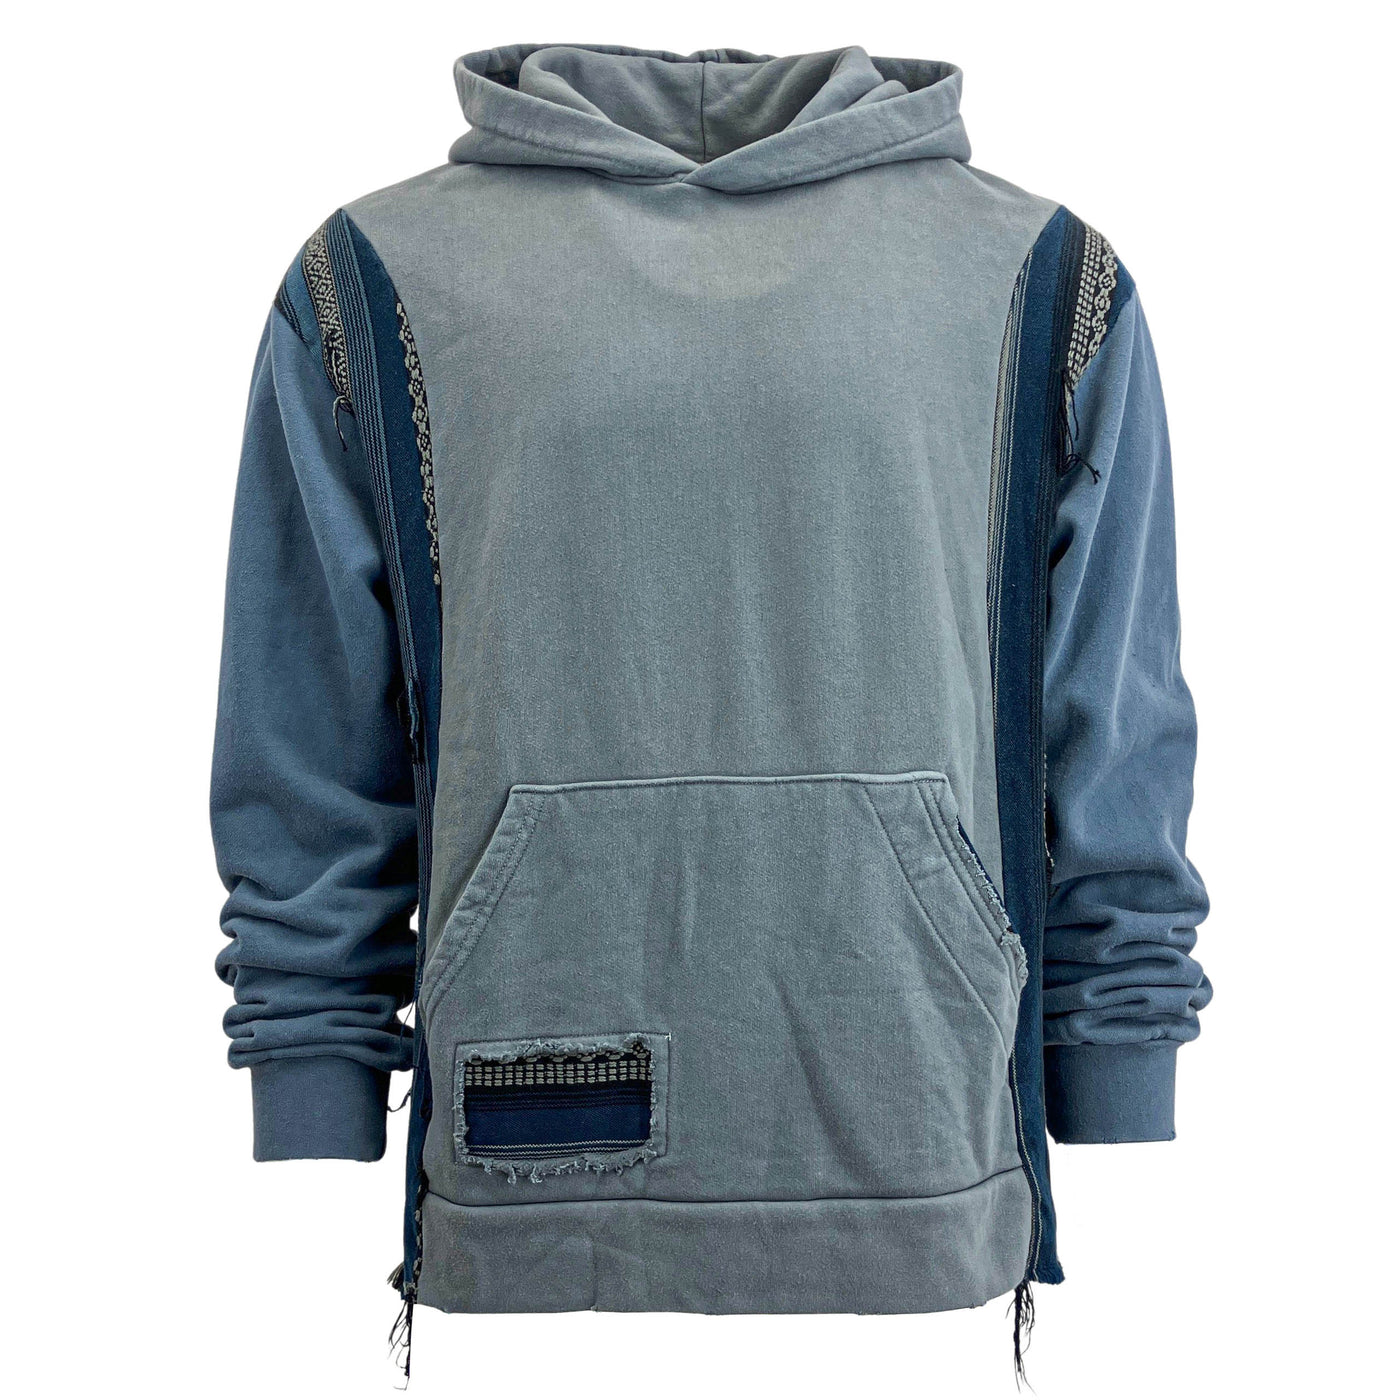 Alchemist Hunger Strike Hoodie in Grey and Blue - Discounts on Alchemist at UAL